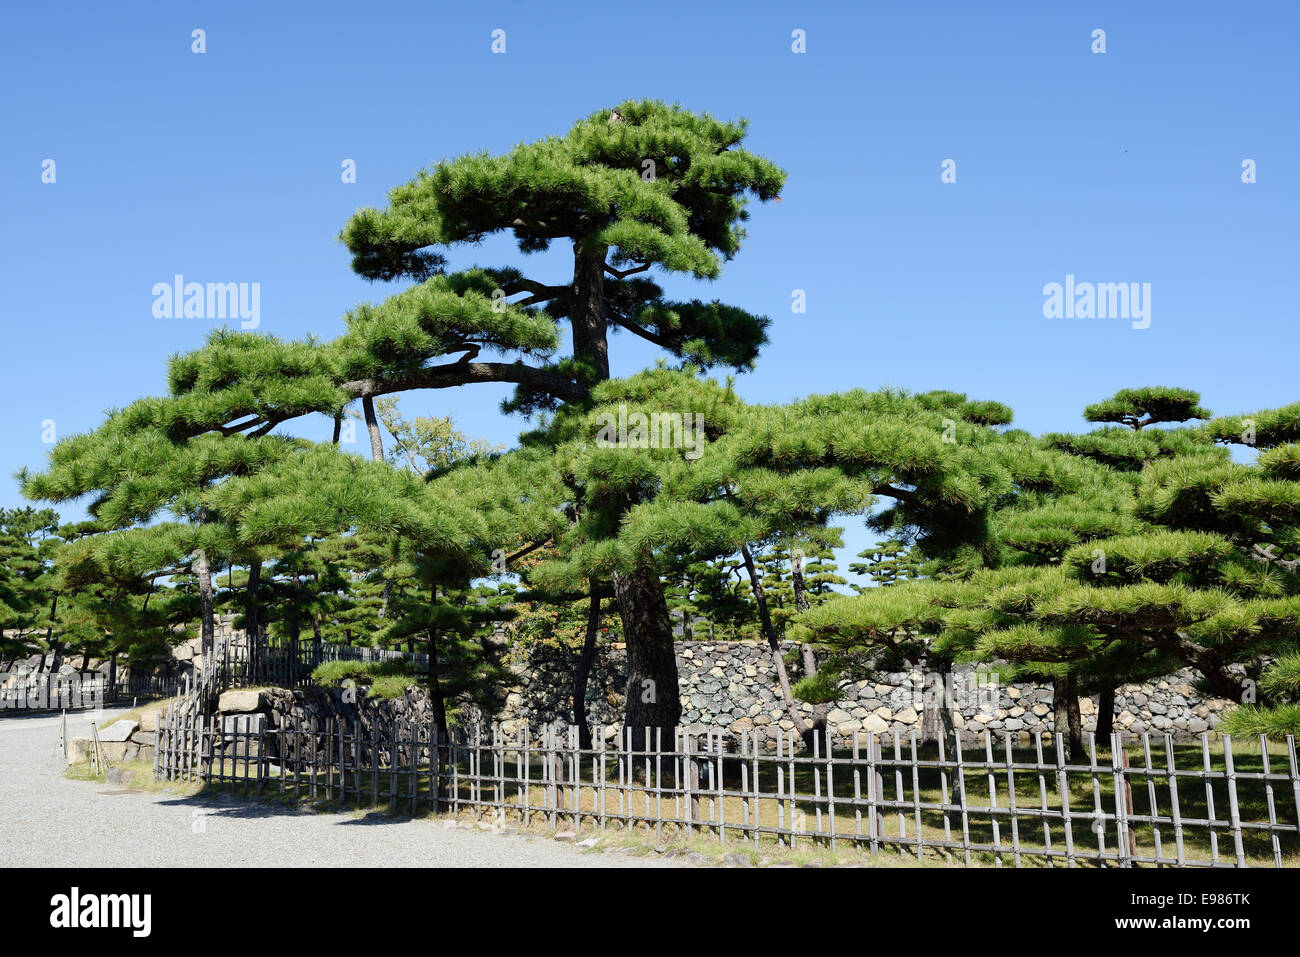 Japanese garden with pine trees against a clear blue sky Stock Photo